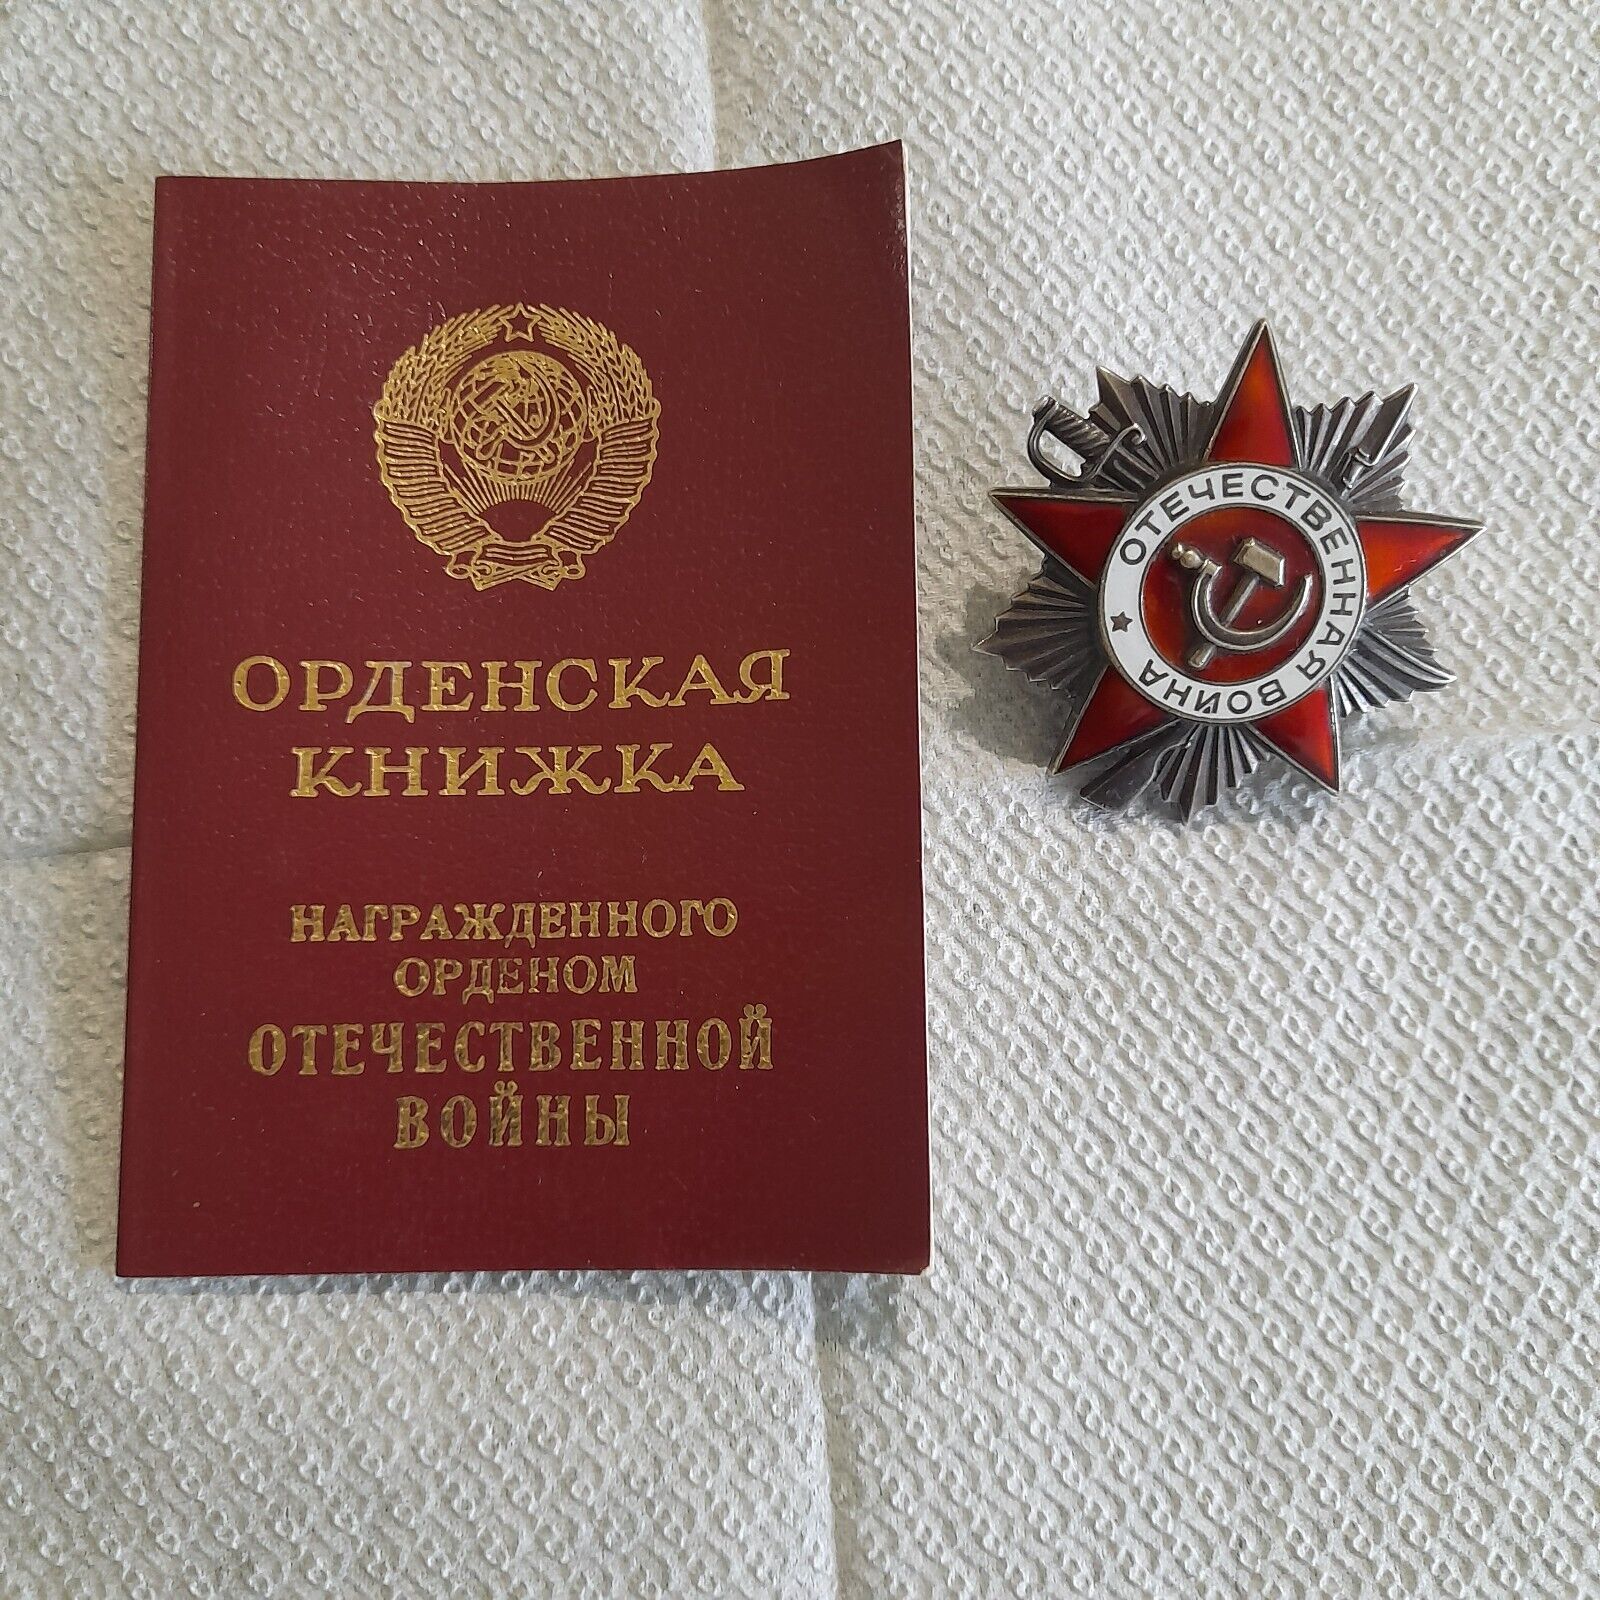 ORIGINAL  Order of the Patriotic War with document Soviet USSR Russian WW2